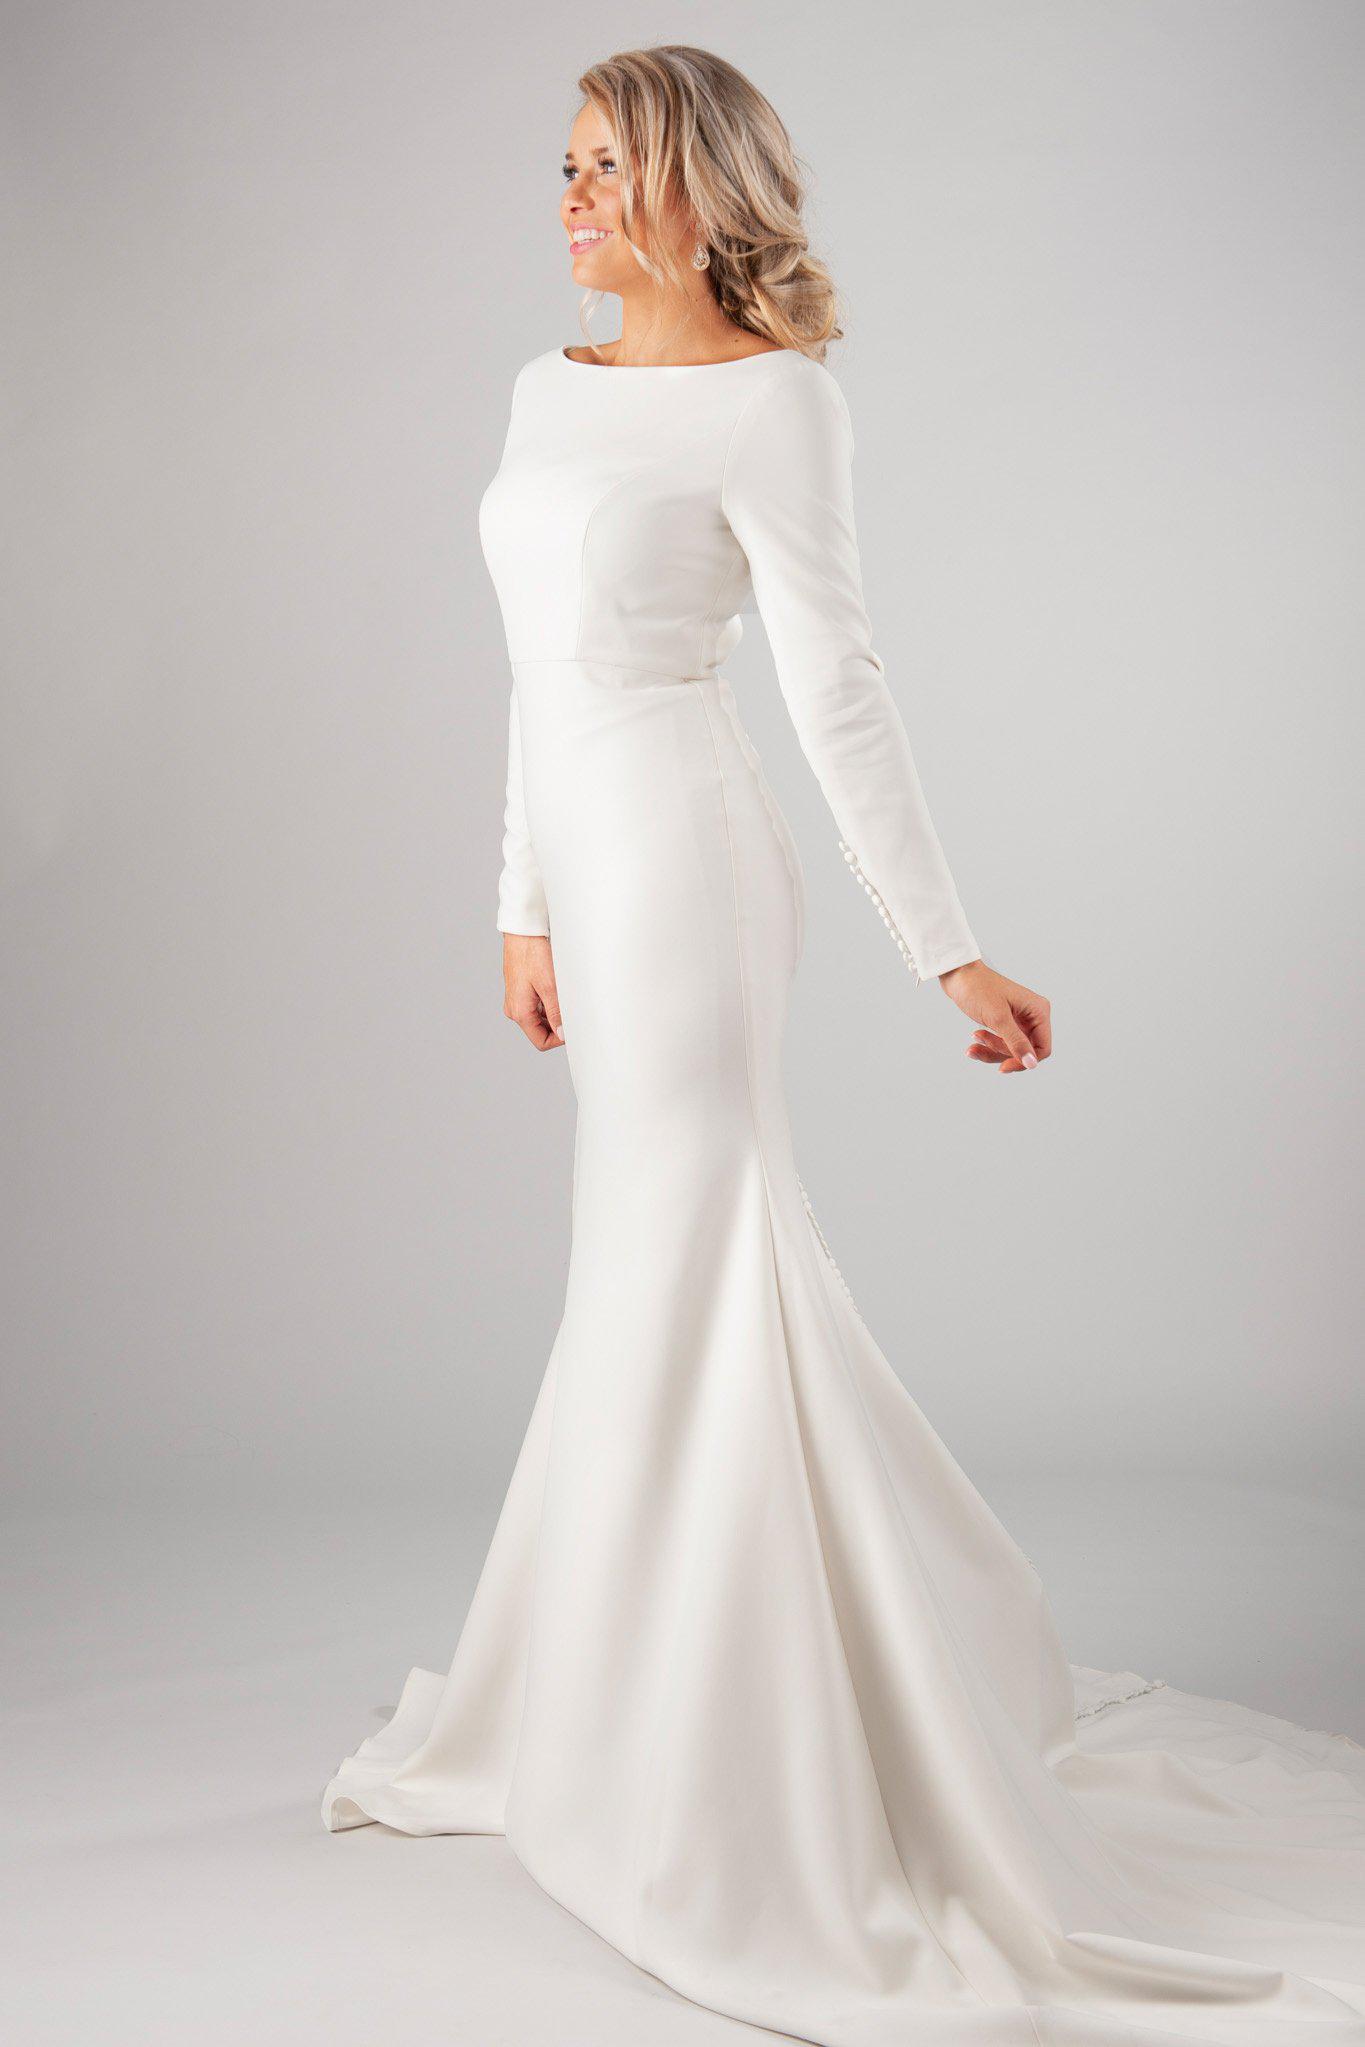 Modest long sleeve bridal gown, style Markella, is part of the Wedding Collection of LatterDayBride, a Salt Lake City bridal shop.